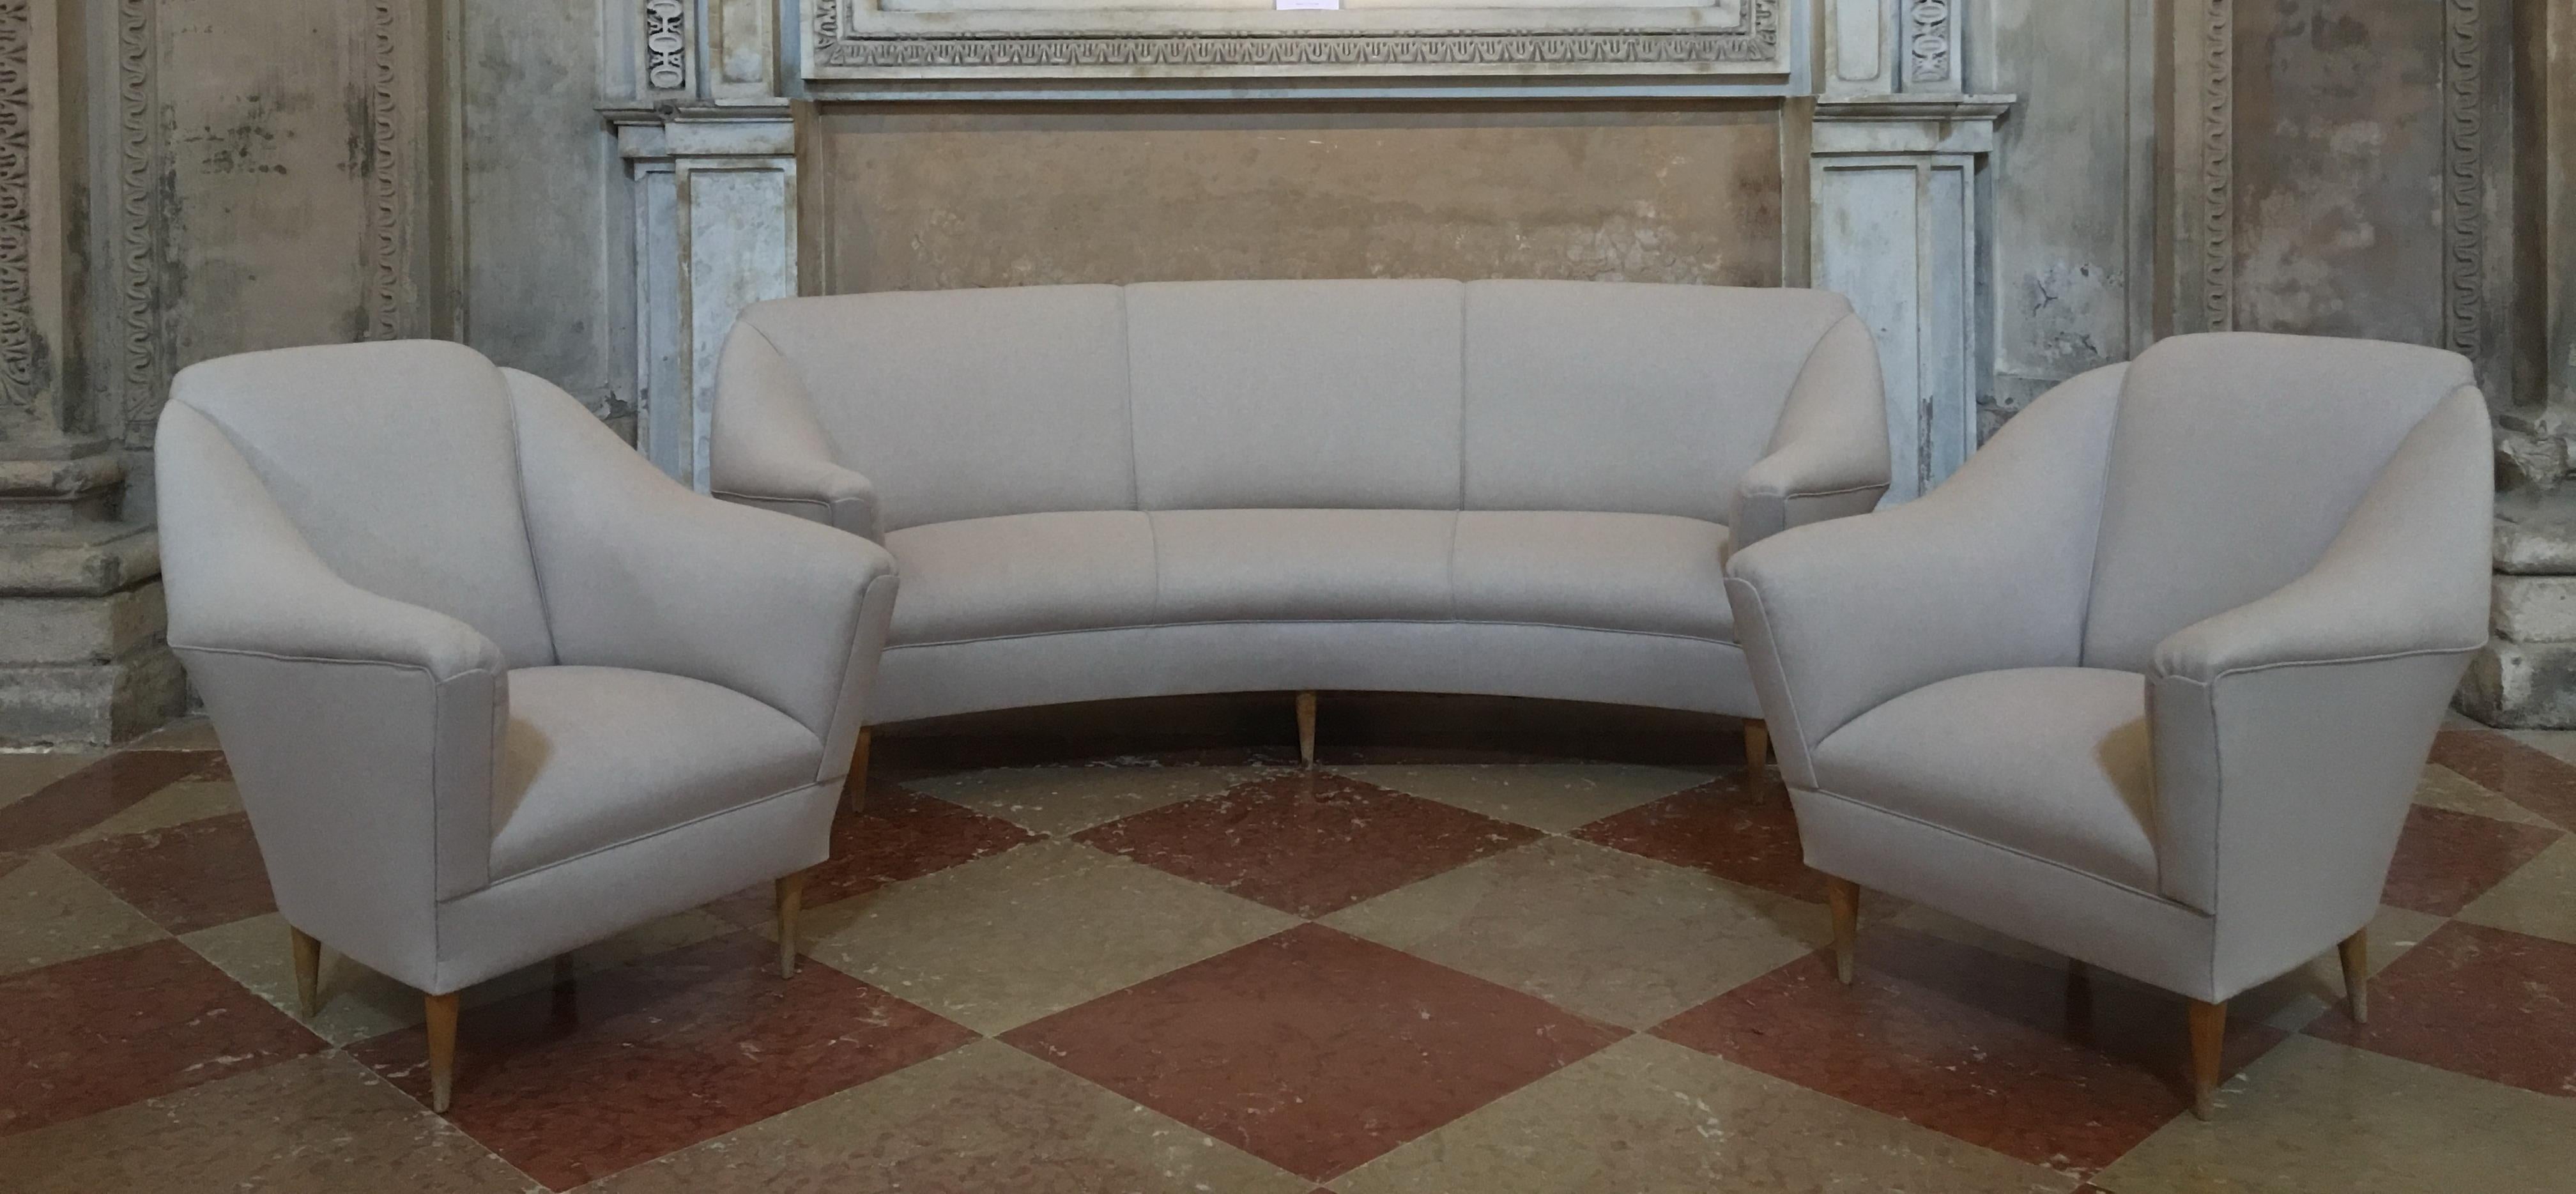 Fabric Ico Parisi for Ariberto Colombo Armchairs and Sofa For Sale